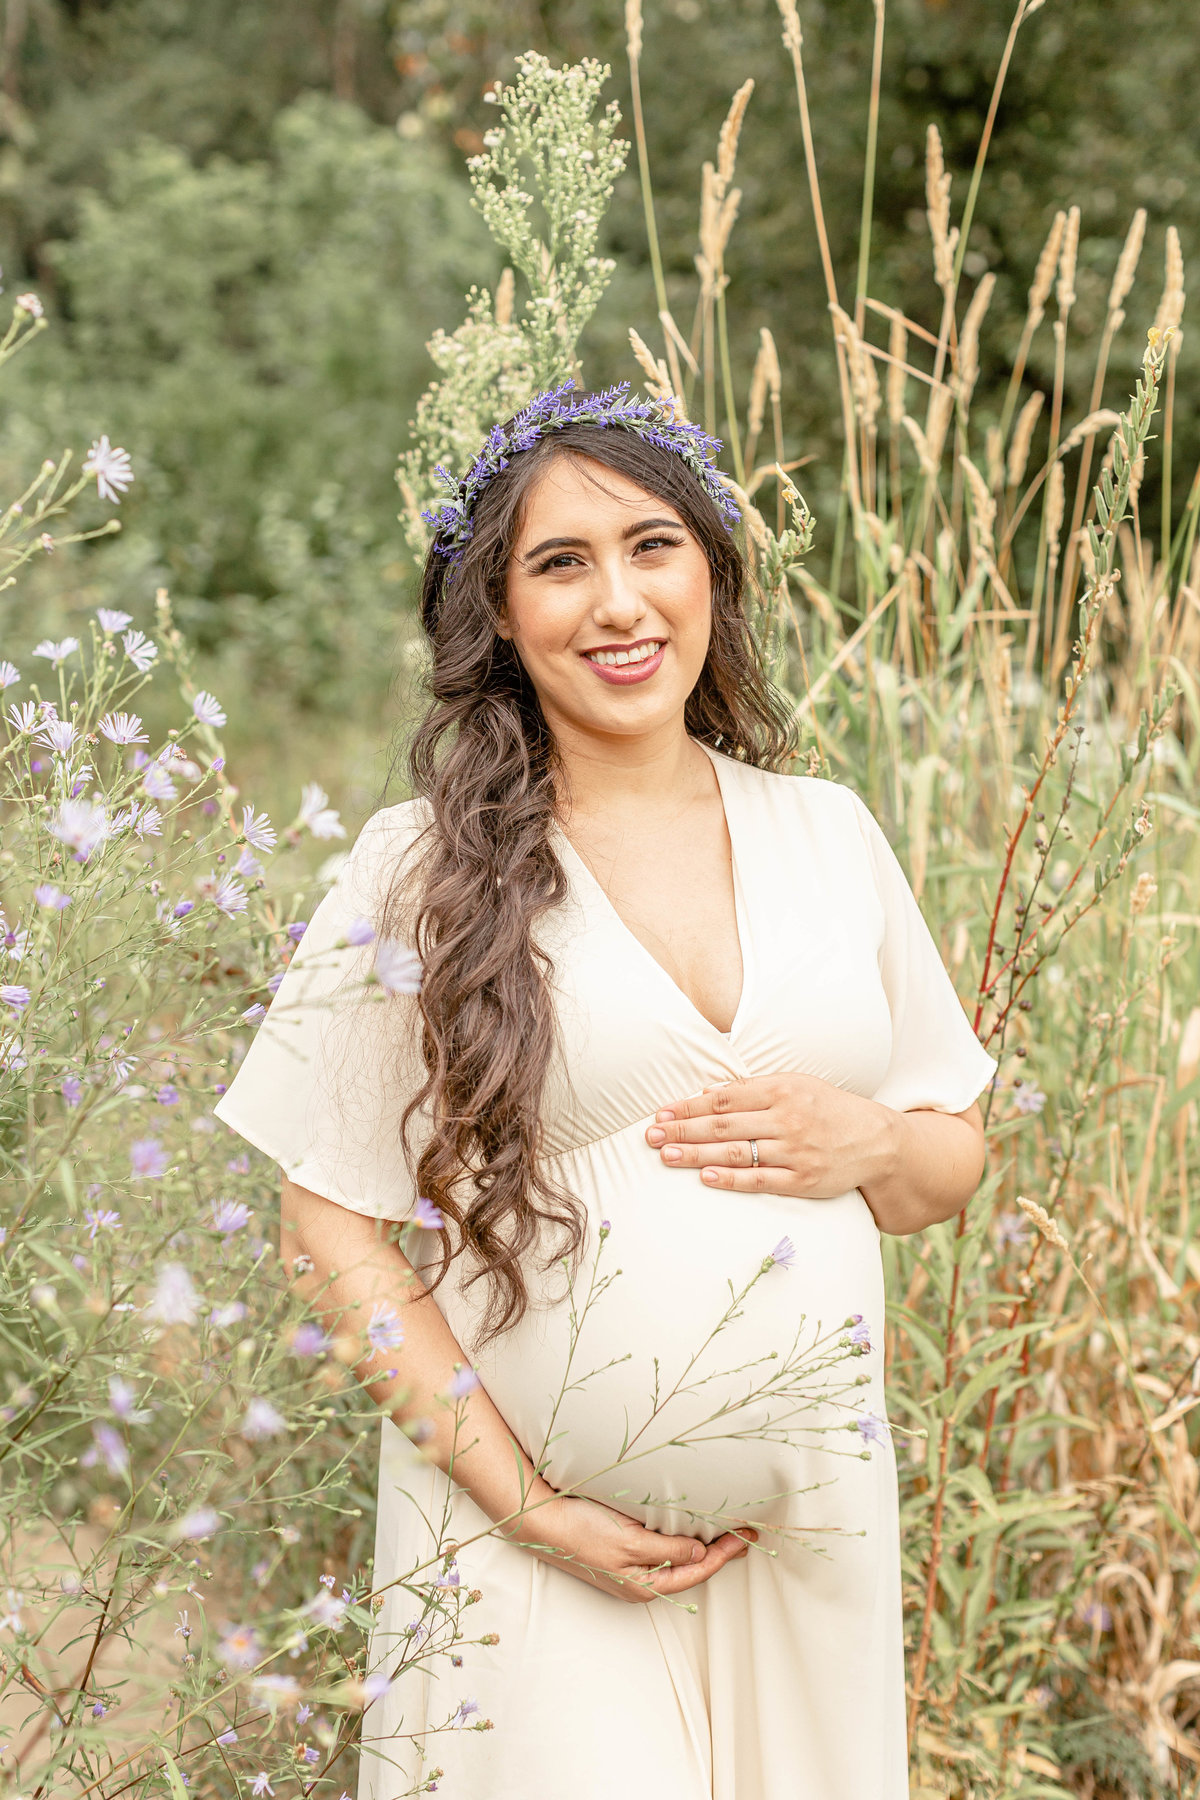 Pregnant woman with long dark curly hair wearing a floral crown and standing in a field of wildflowers at Portland Maternity Photography session outdoors.